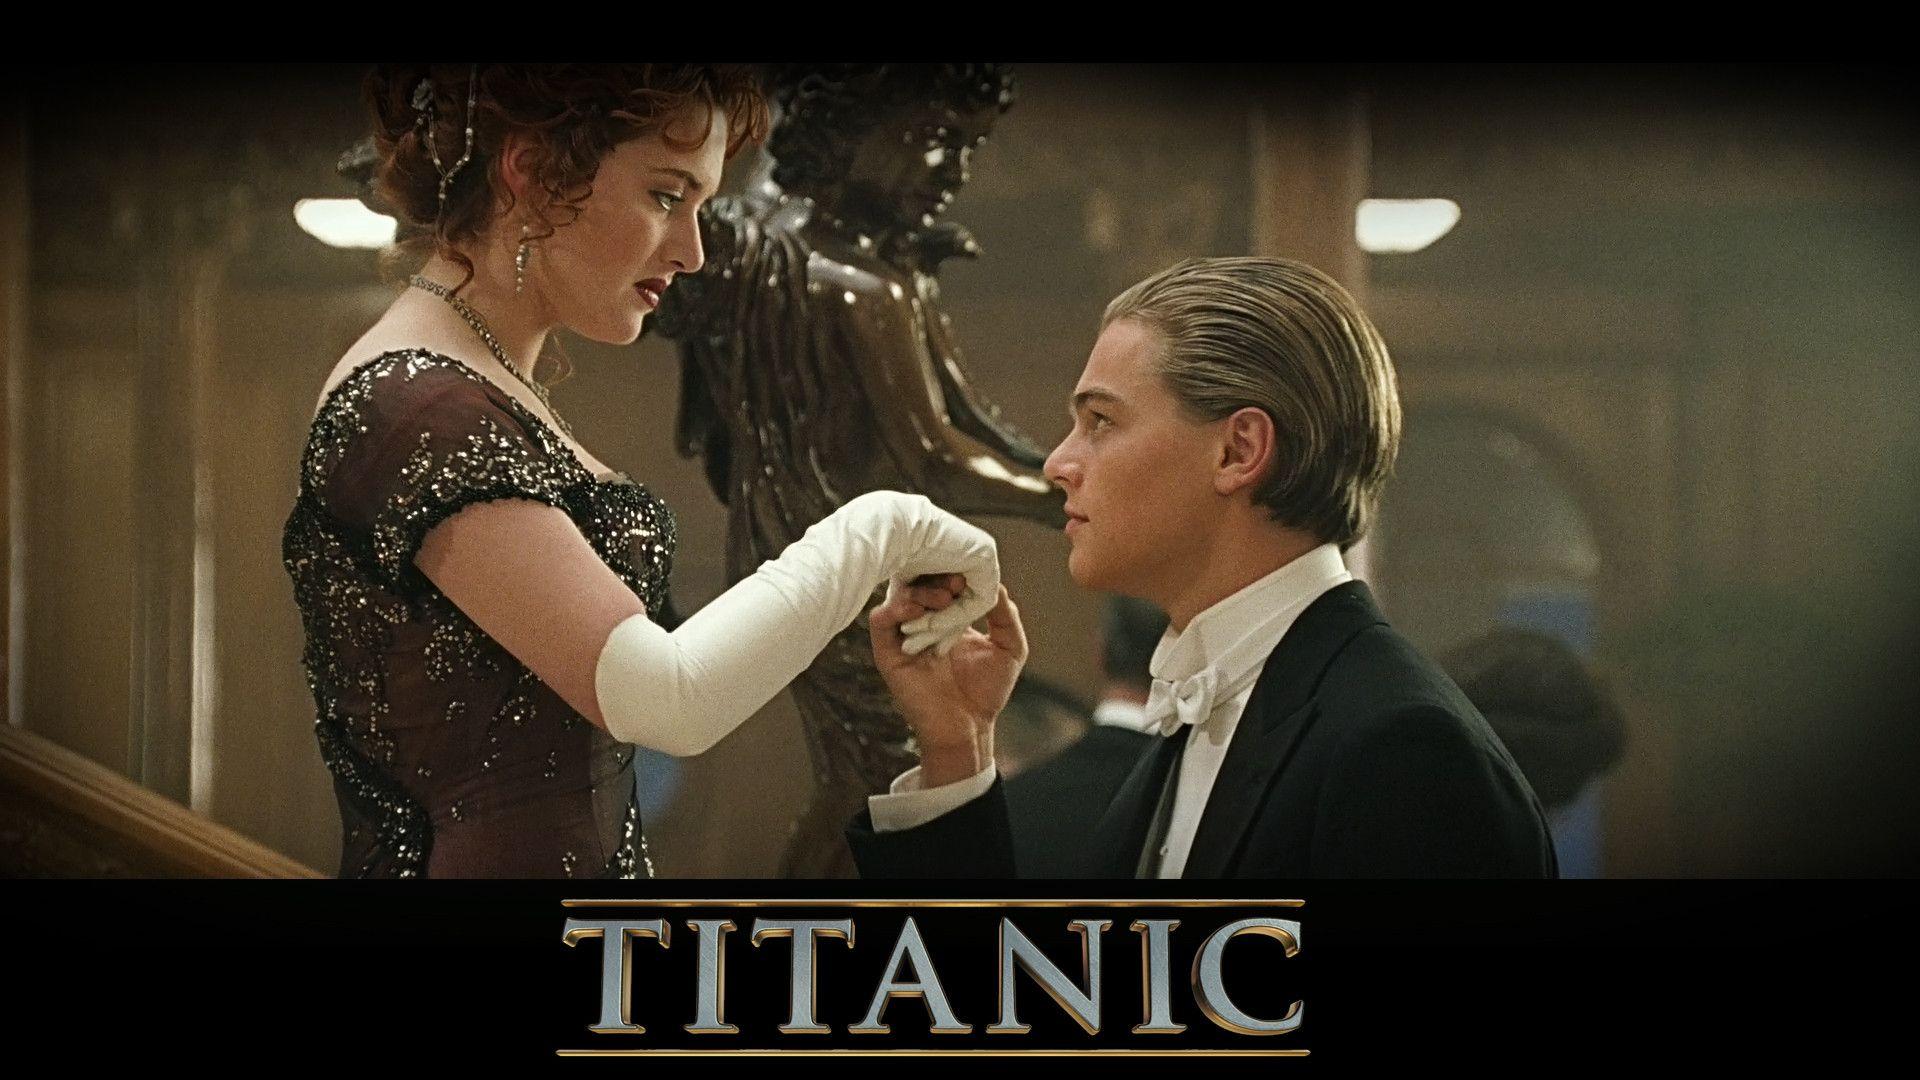 movie review about titanic